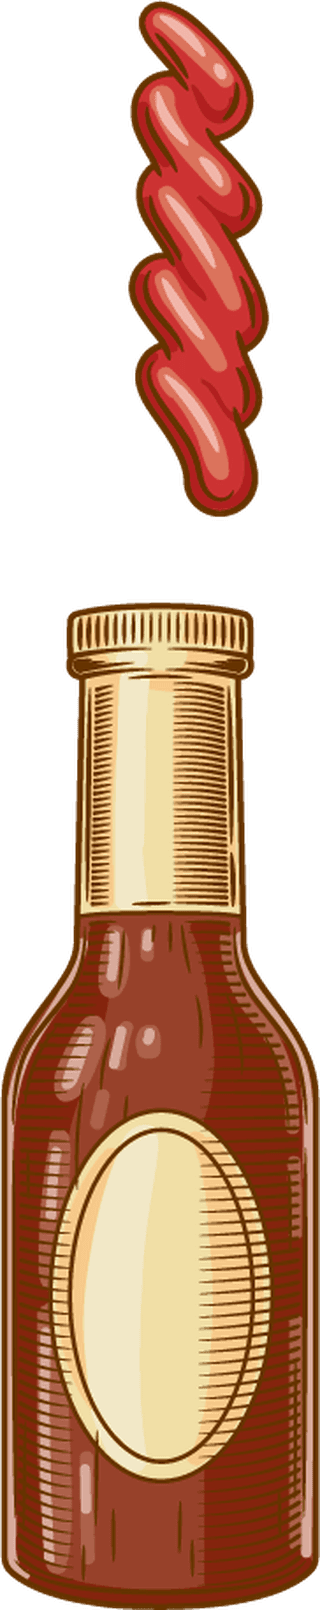 vectorillustration-engraving-style-different-sauces-are-poured-from-bottles-720604